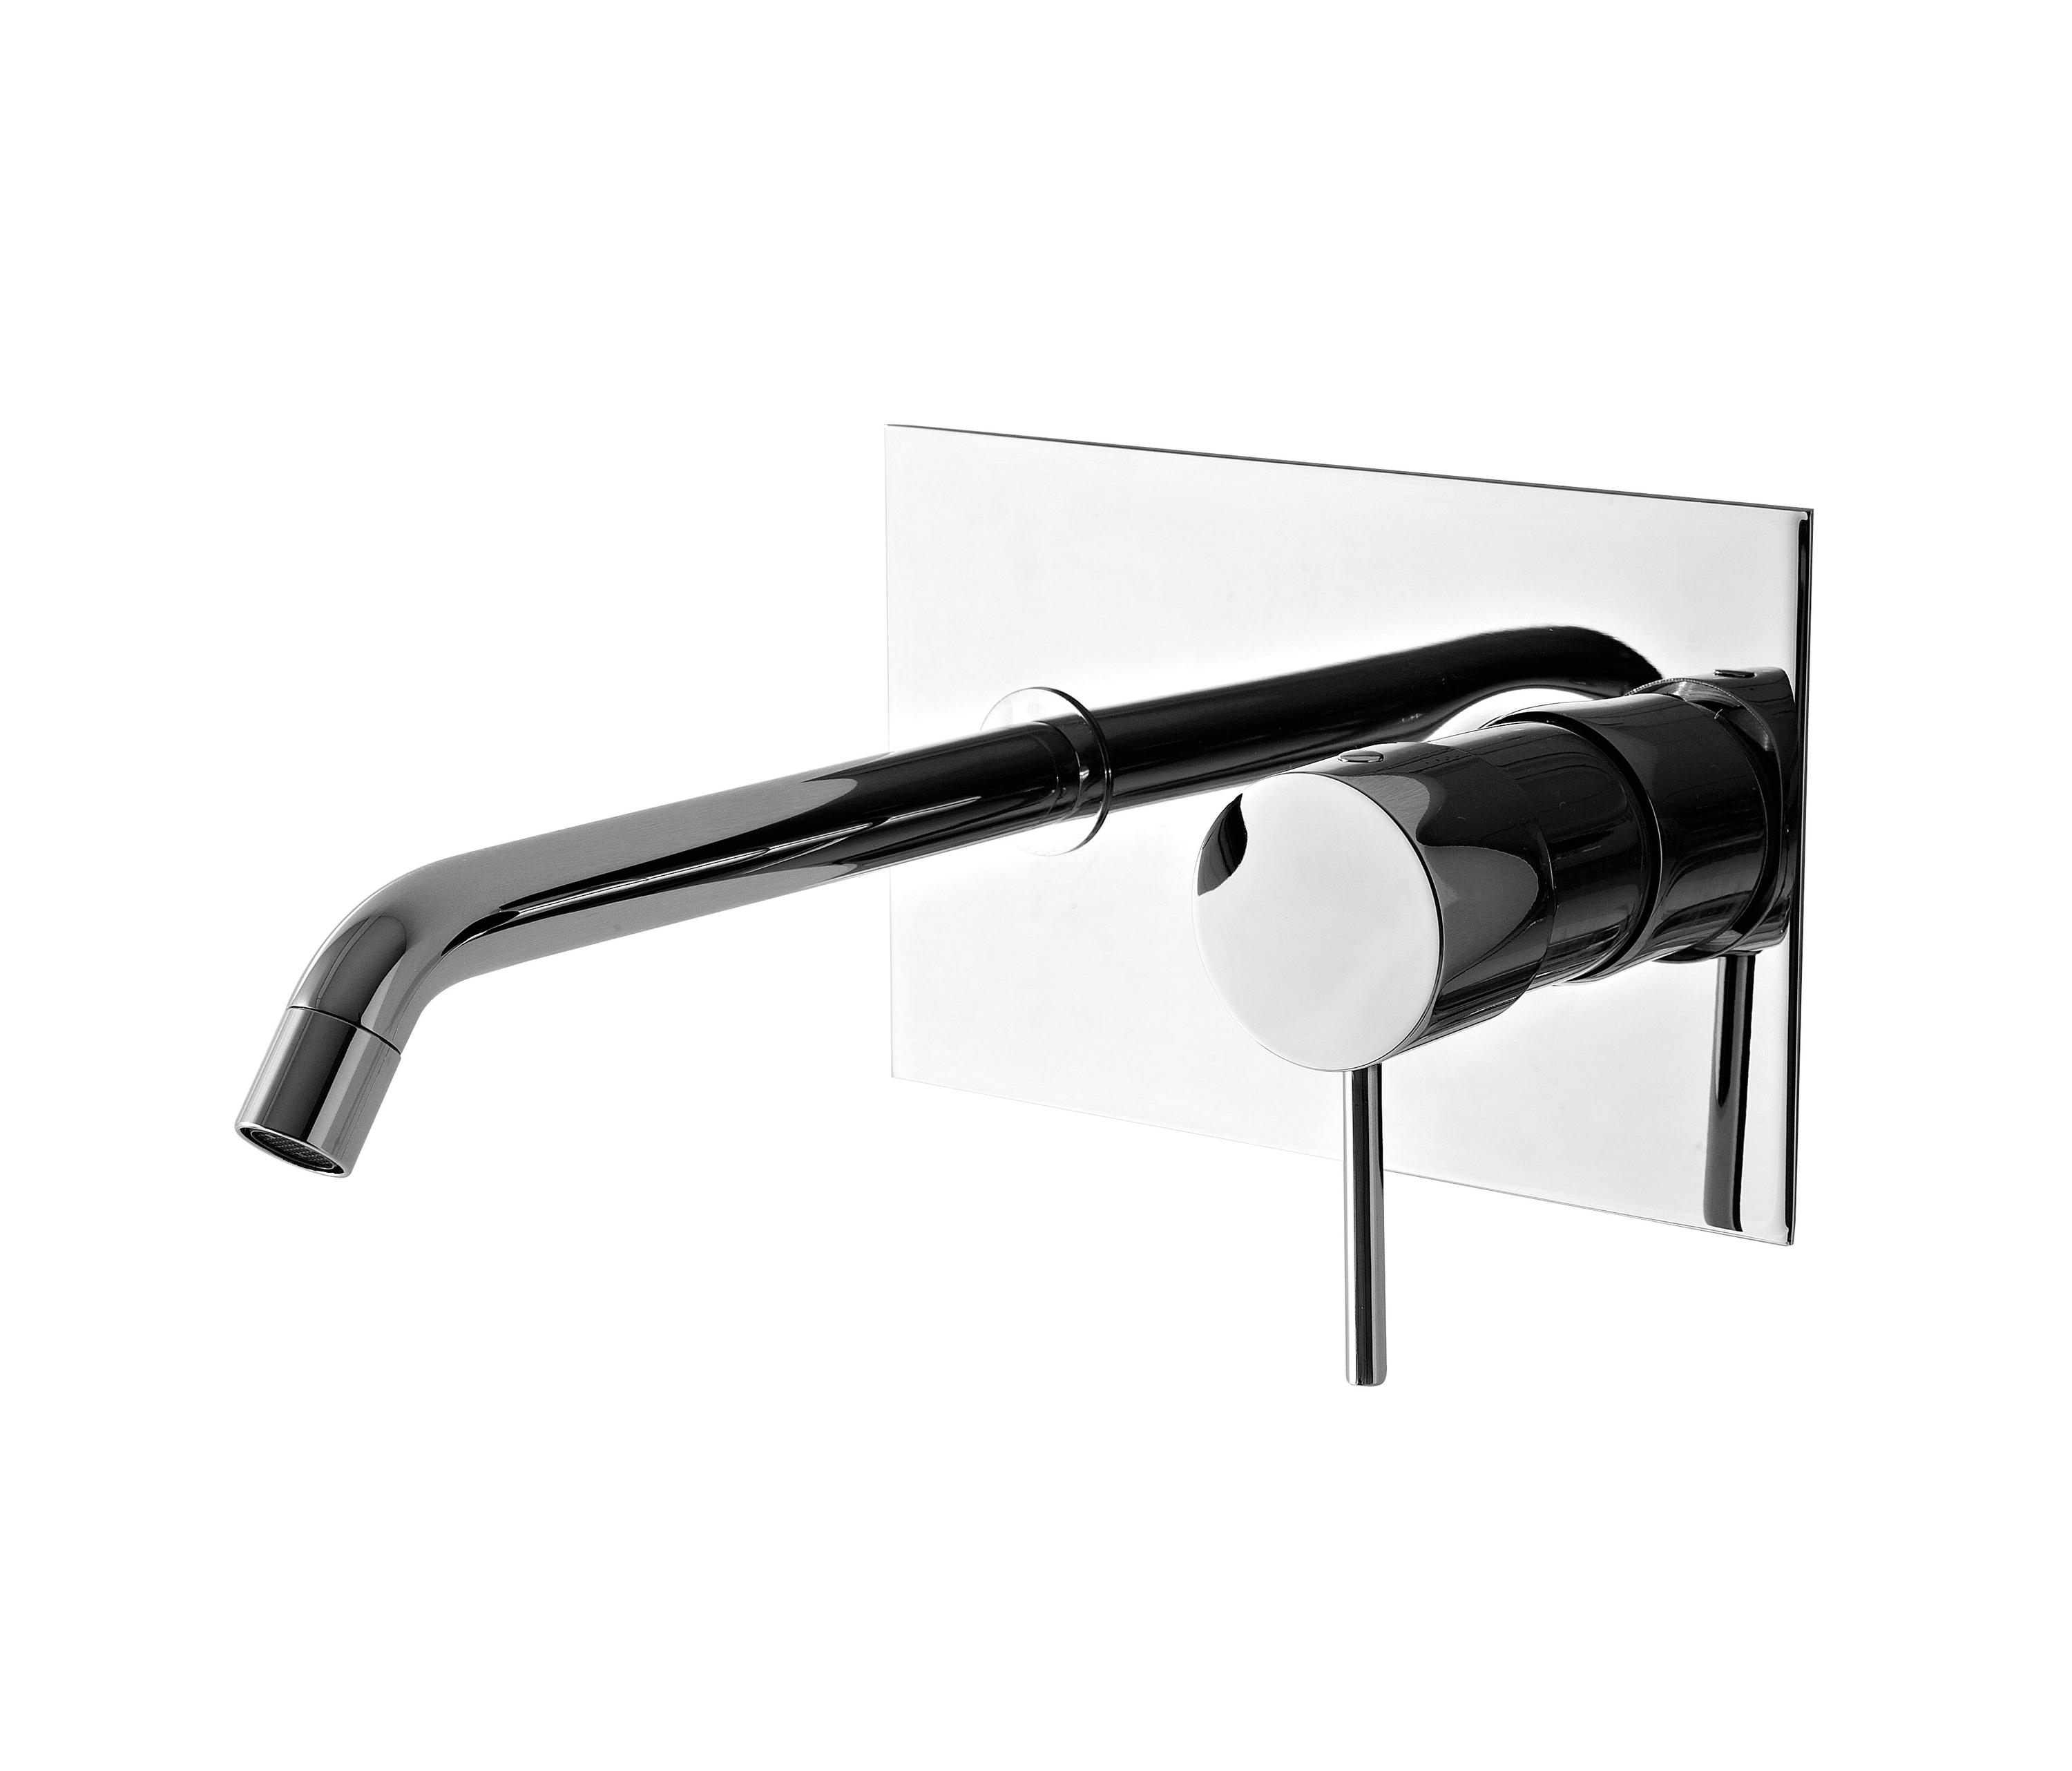 Chrome Concealed Wall Mount Bathroom Basin Sink Mixer Faucet Single Handle Taps 